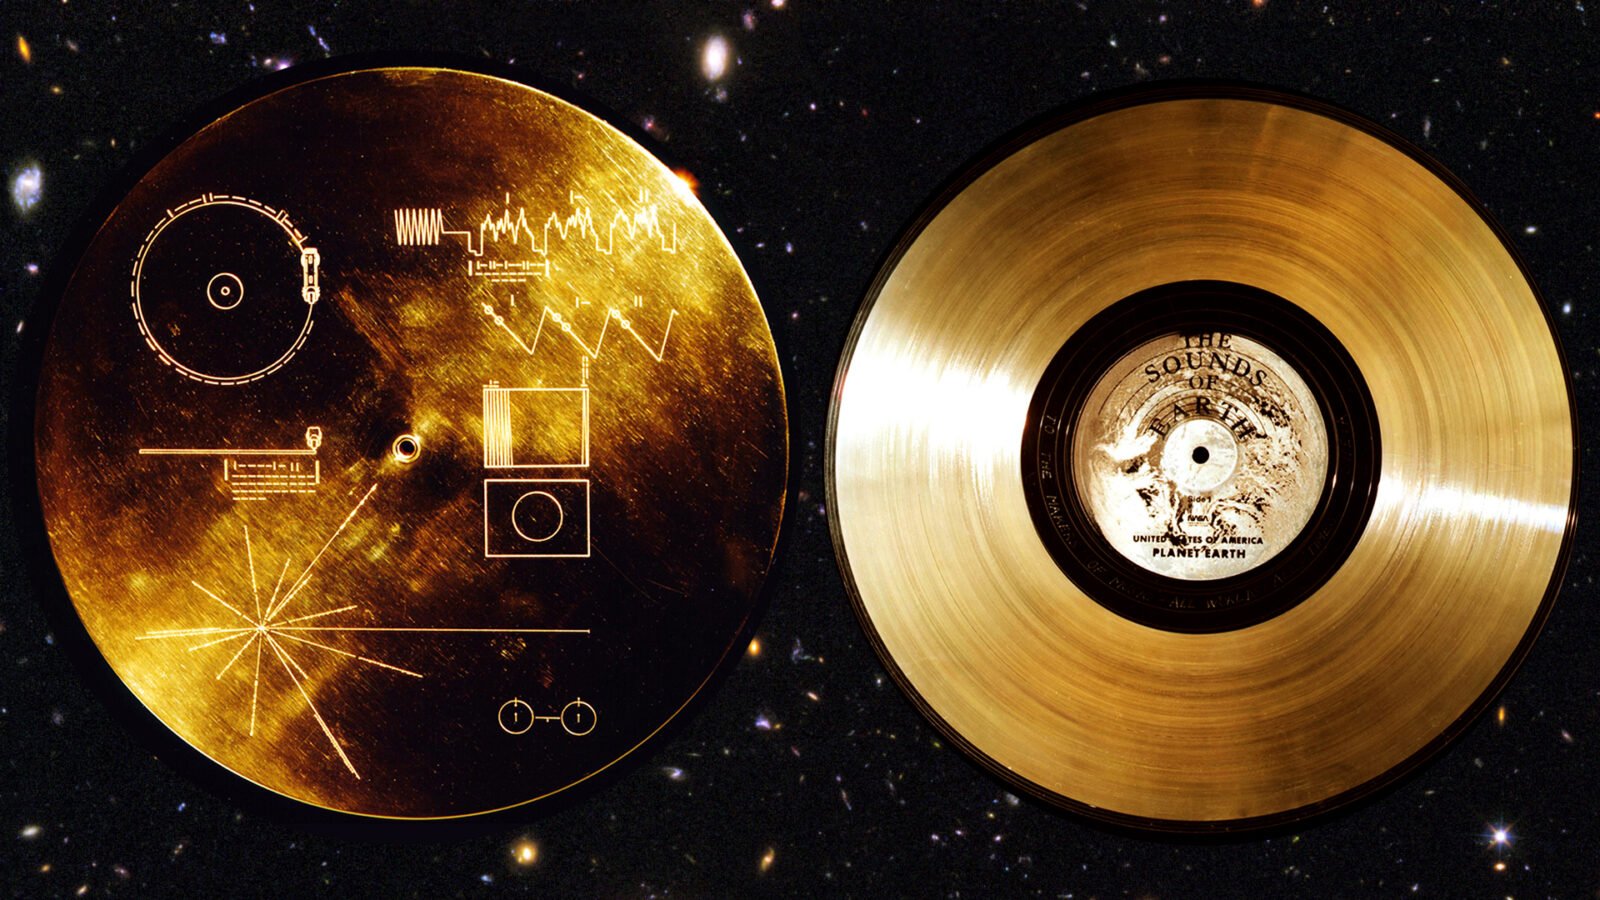 voyager record music